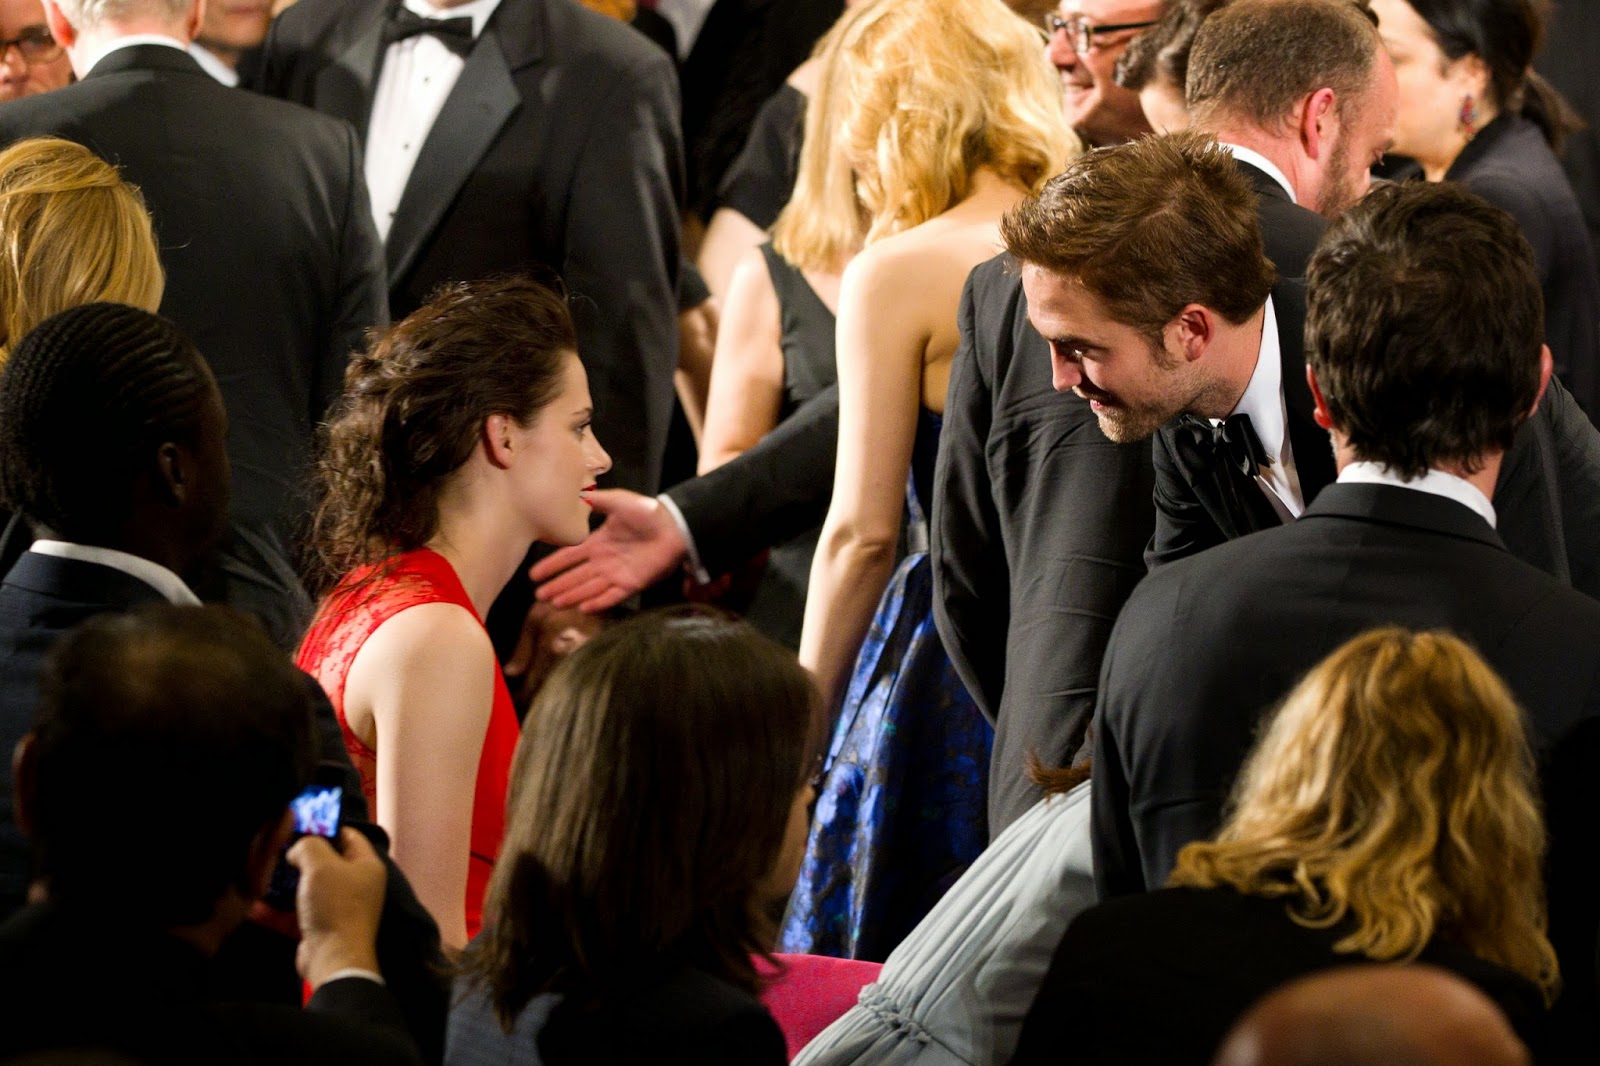 Beyond-Twilight: Rob and Kristen: Cannes Here We Come1600 x 1066